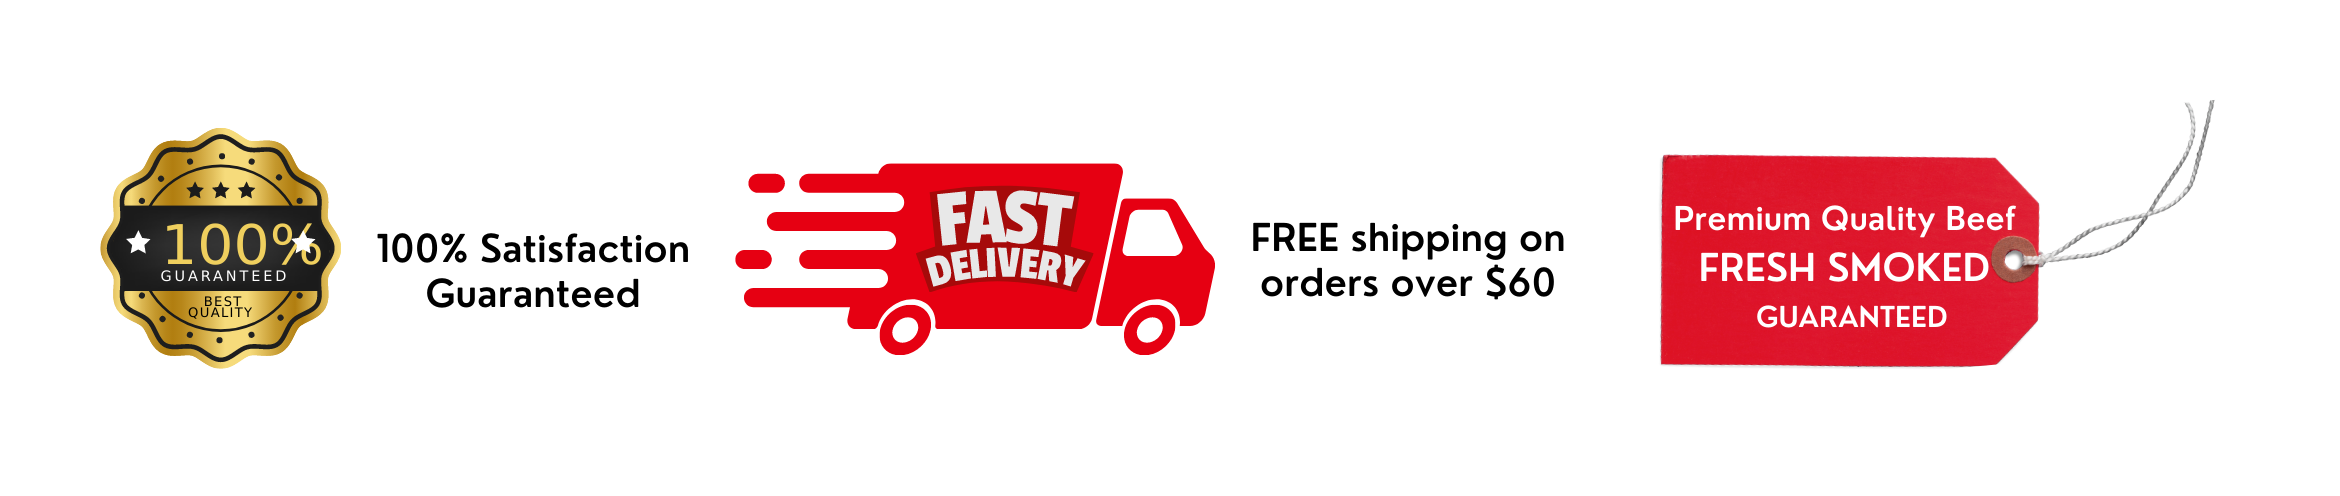 Free shipping over $60